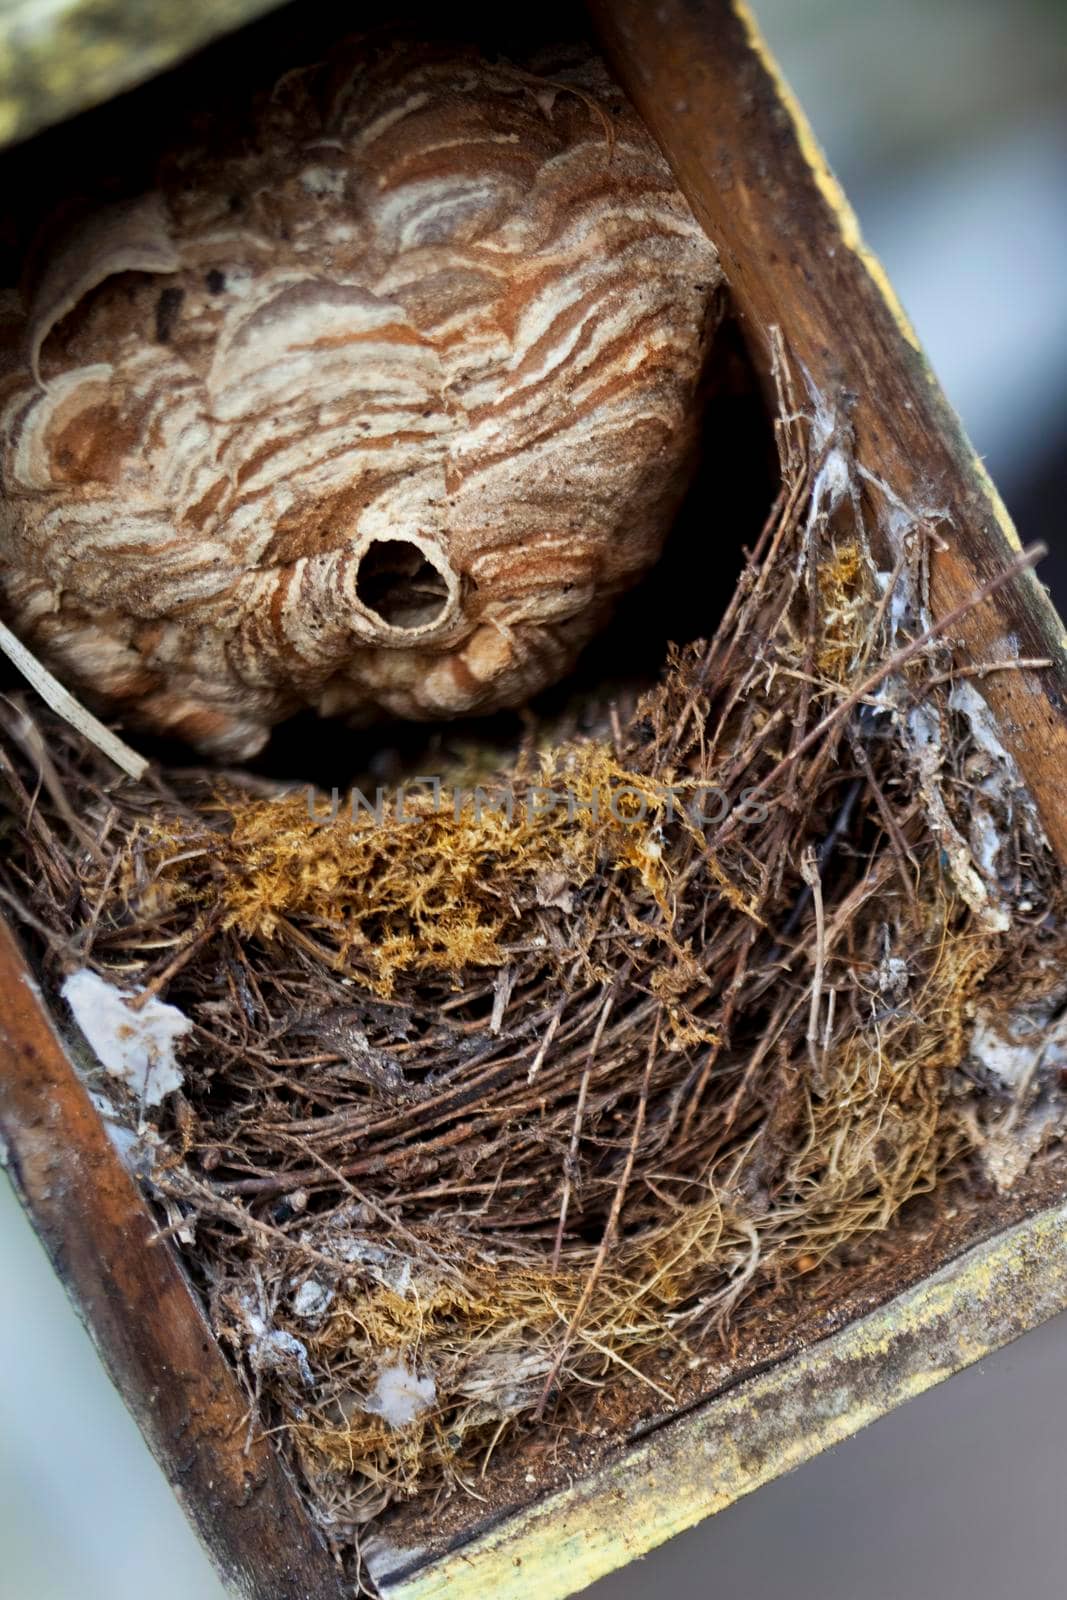 Hornet's nest in a birdhouse by jacques_palut